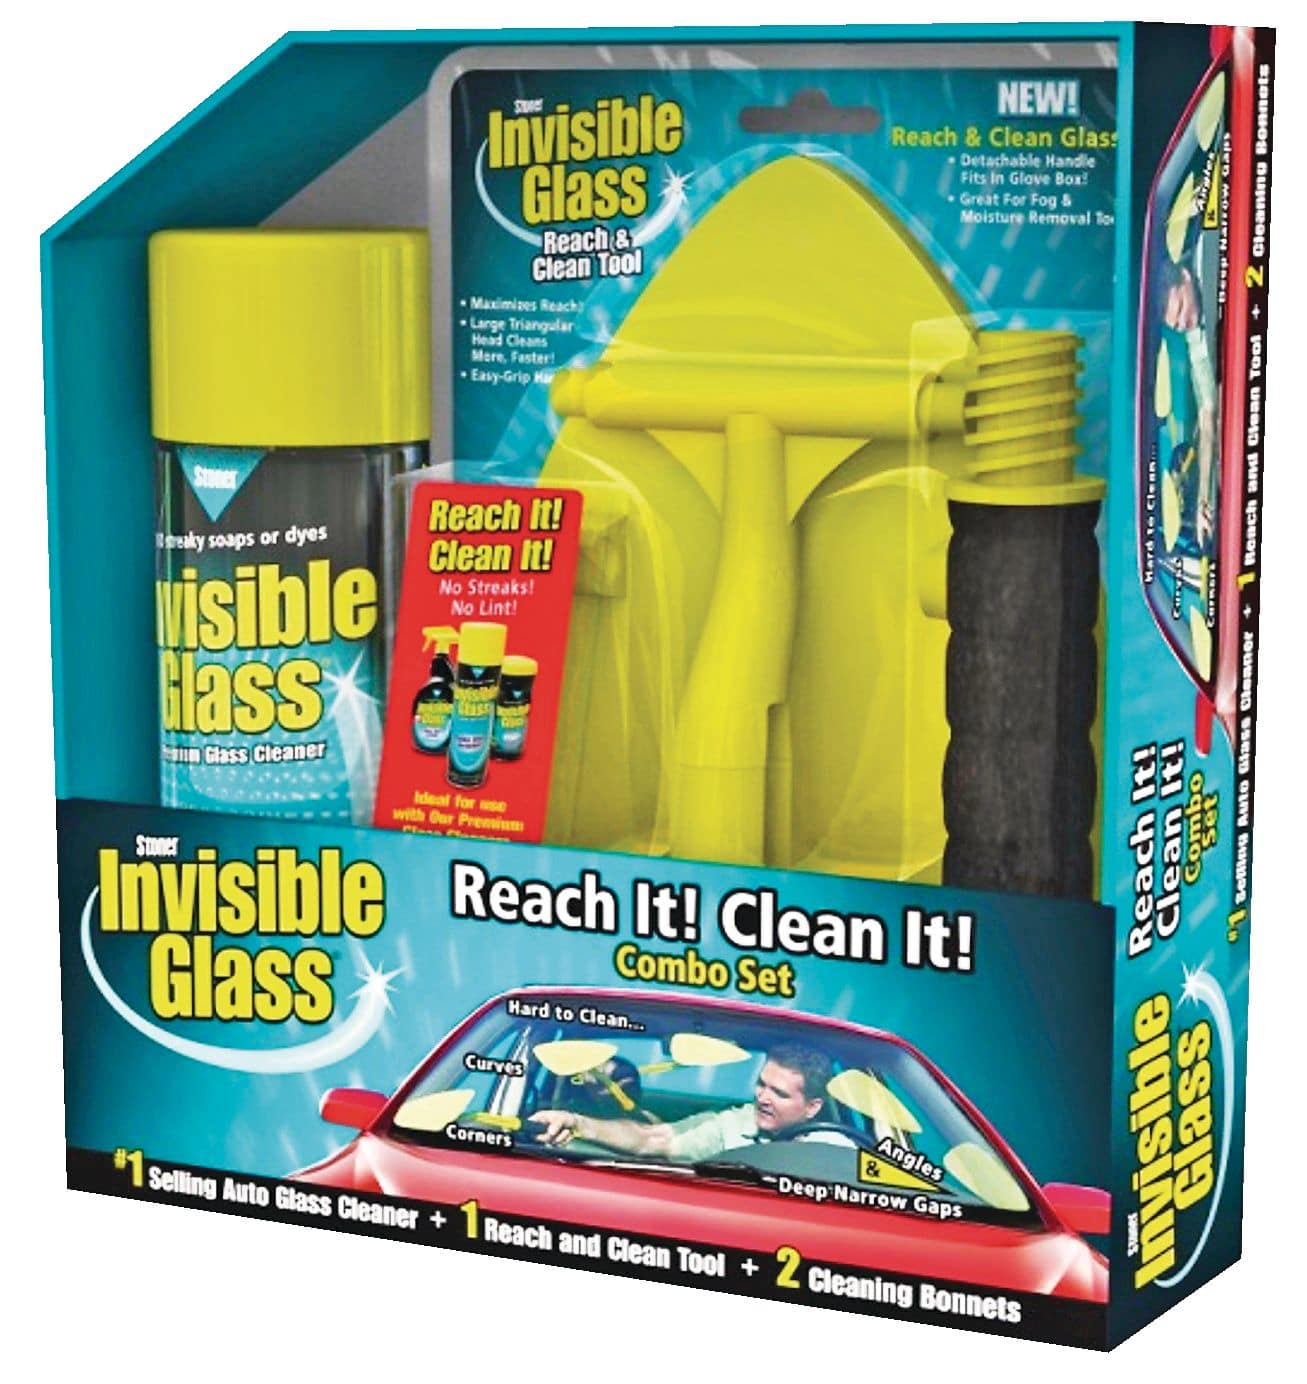 https://media-www.canadiantire.ca/product/automotive/car-care-accessories/auto-cleaning-chemicals/3996115/invisible-glass-reach-and-clean-kit-a53708be-4347-406d-a17d-97d7e45b8b89-jpgrendition.jpg